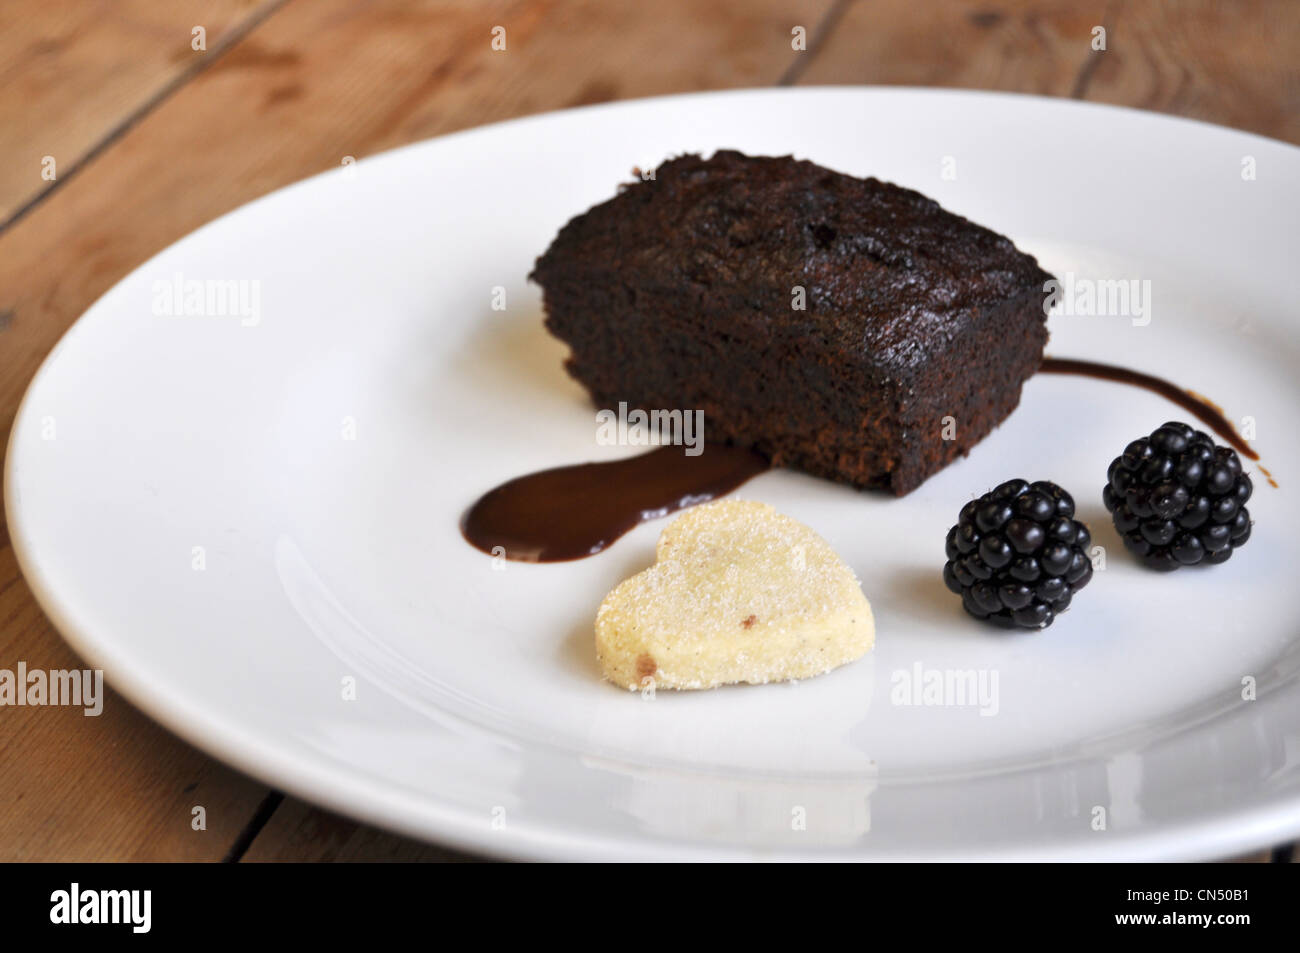 Chocolate pudding on a plate with a shortbread bisquit and berries. Stock Photo